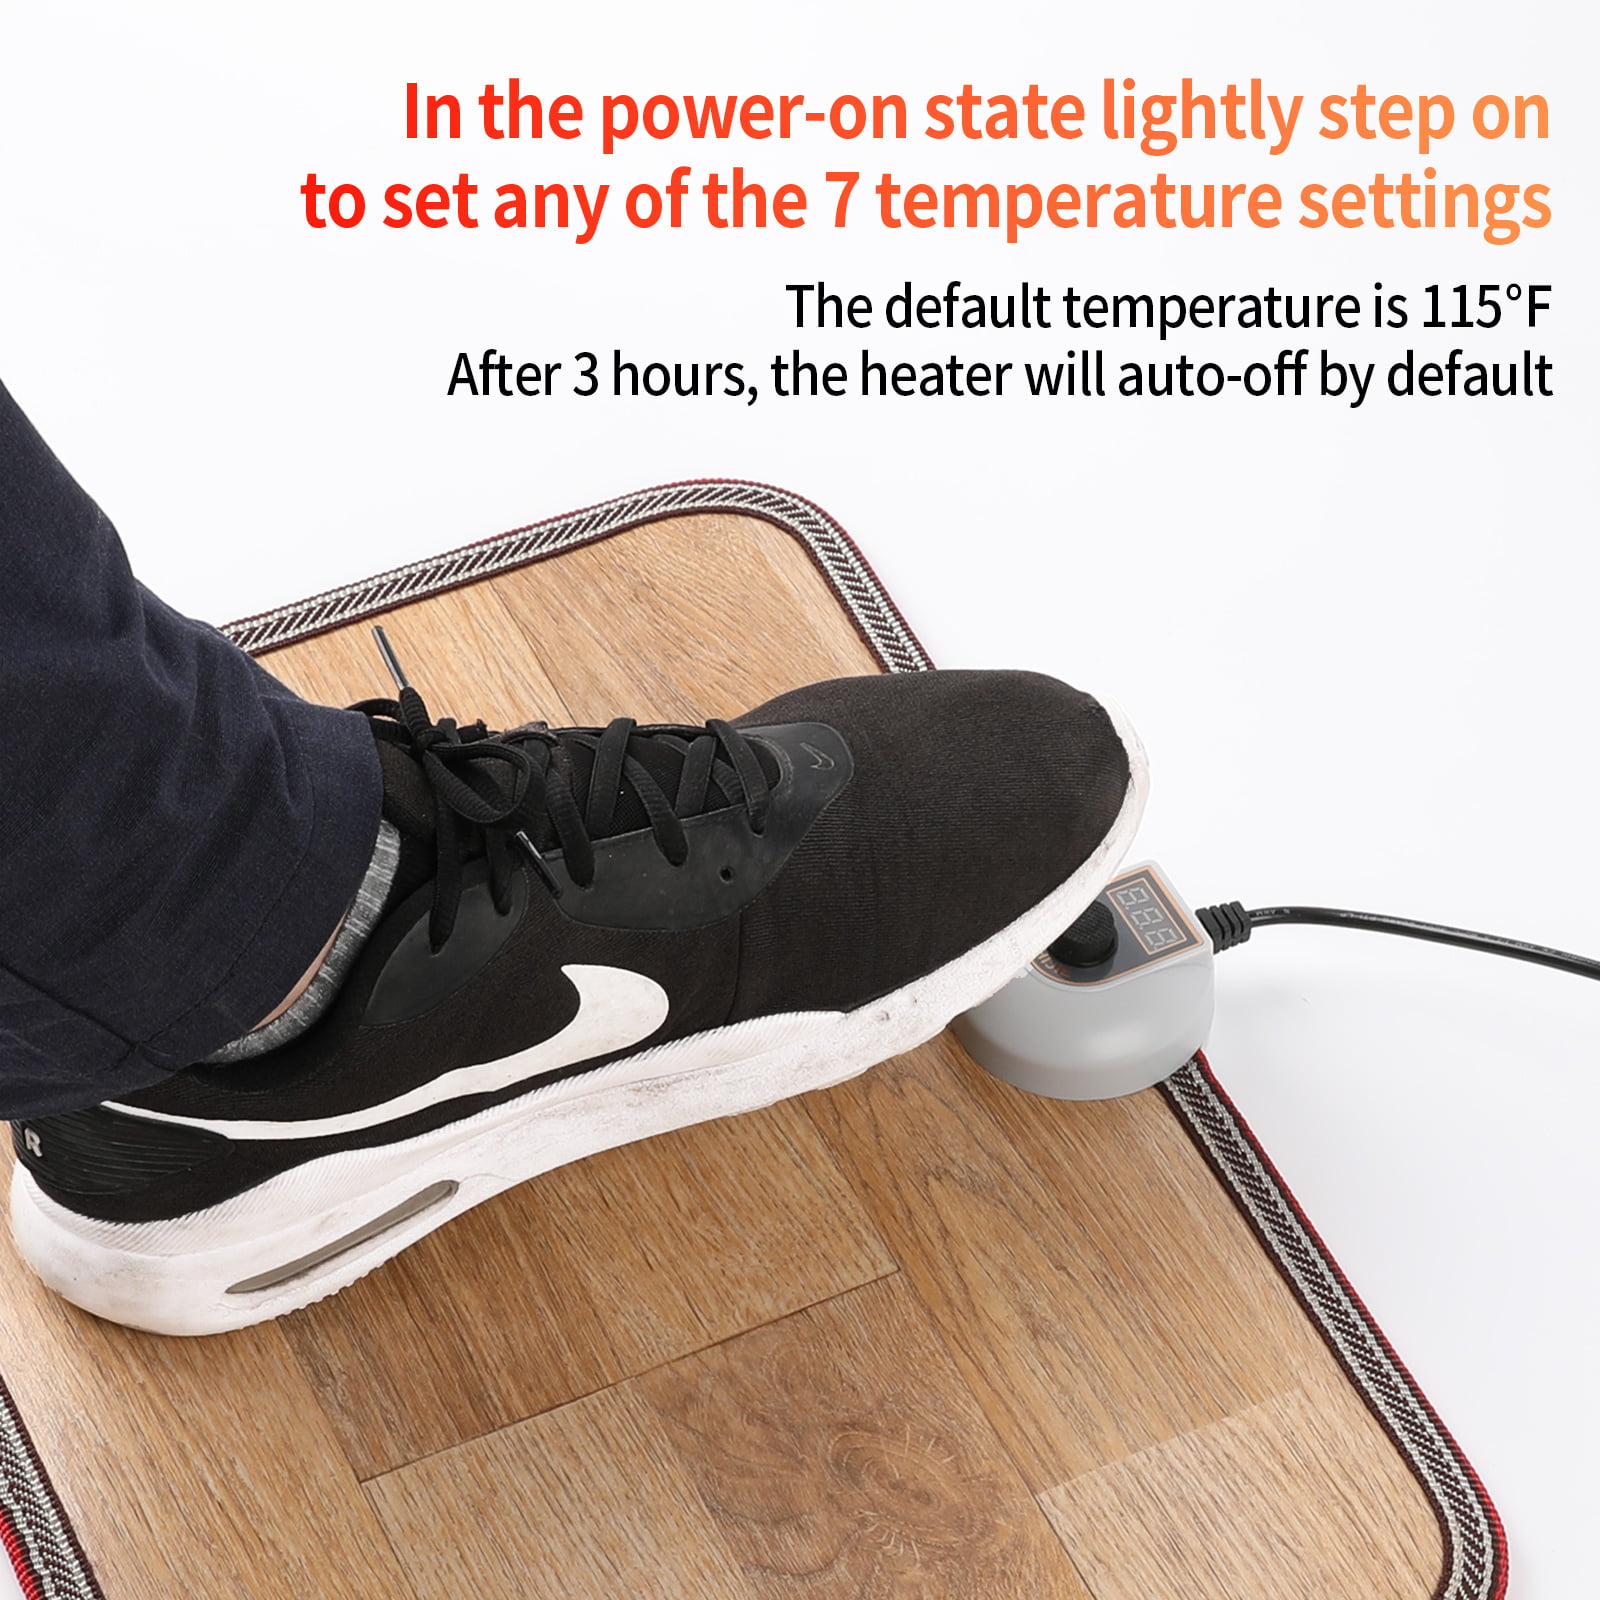 Heated Floor Mat - Foot Warmer Under Desk, 19.7x21.7in Heated Feet Rest for  Home Office Desk, Winter 110V Electric Heating Pad with 3 Timers & 10